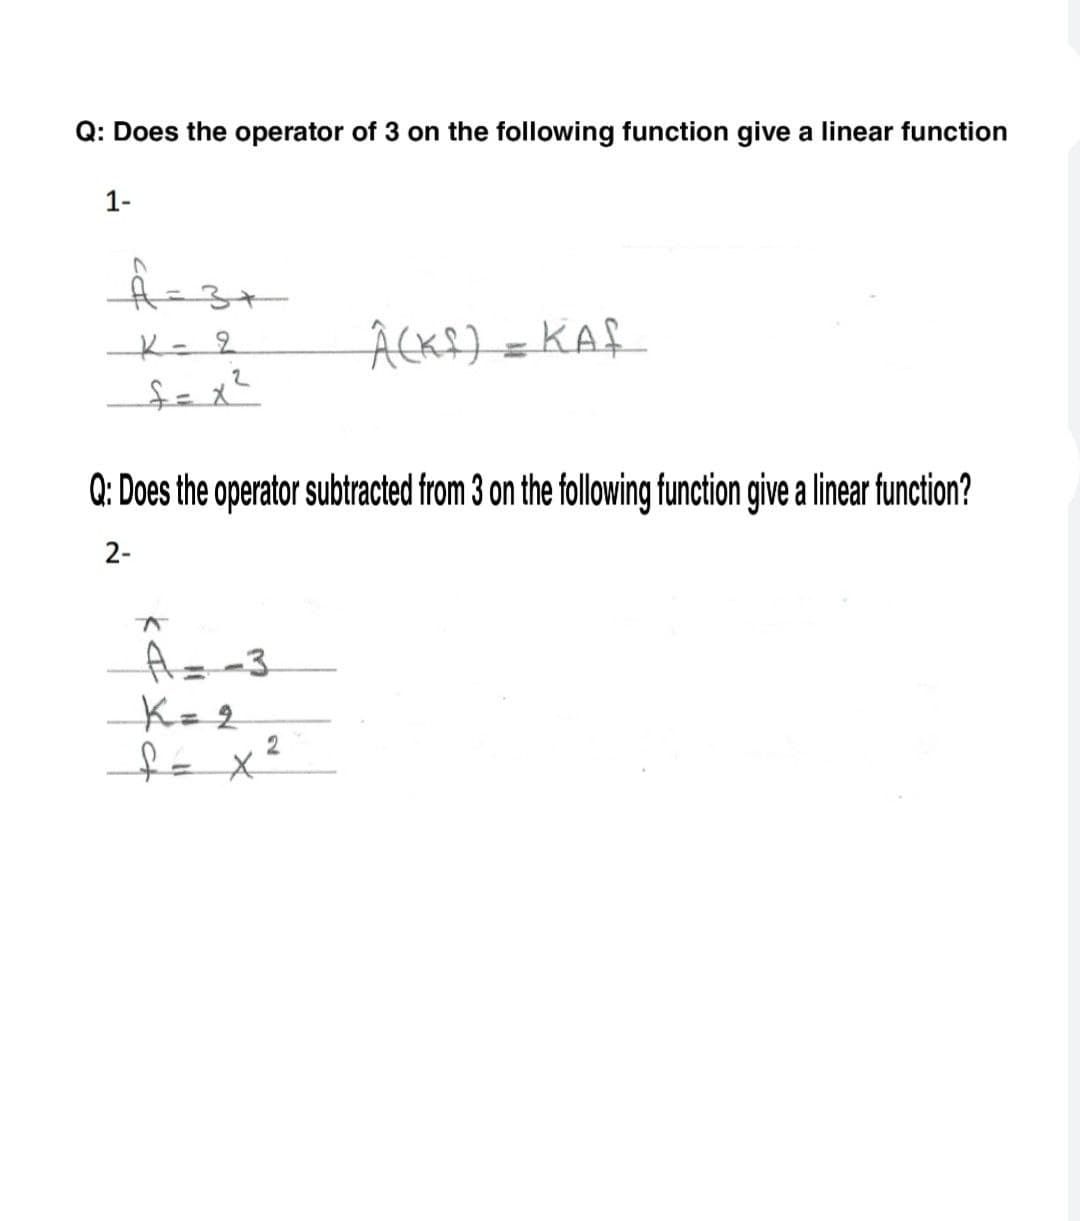 Q: Does the operator of 3 on the following function give a linear function
1-
Q: Does the operator subtracted from 3 on the following function give a linear function?
2-
A= -3
Kz2
2
